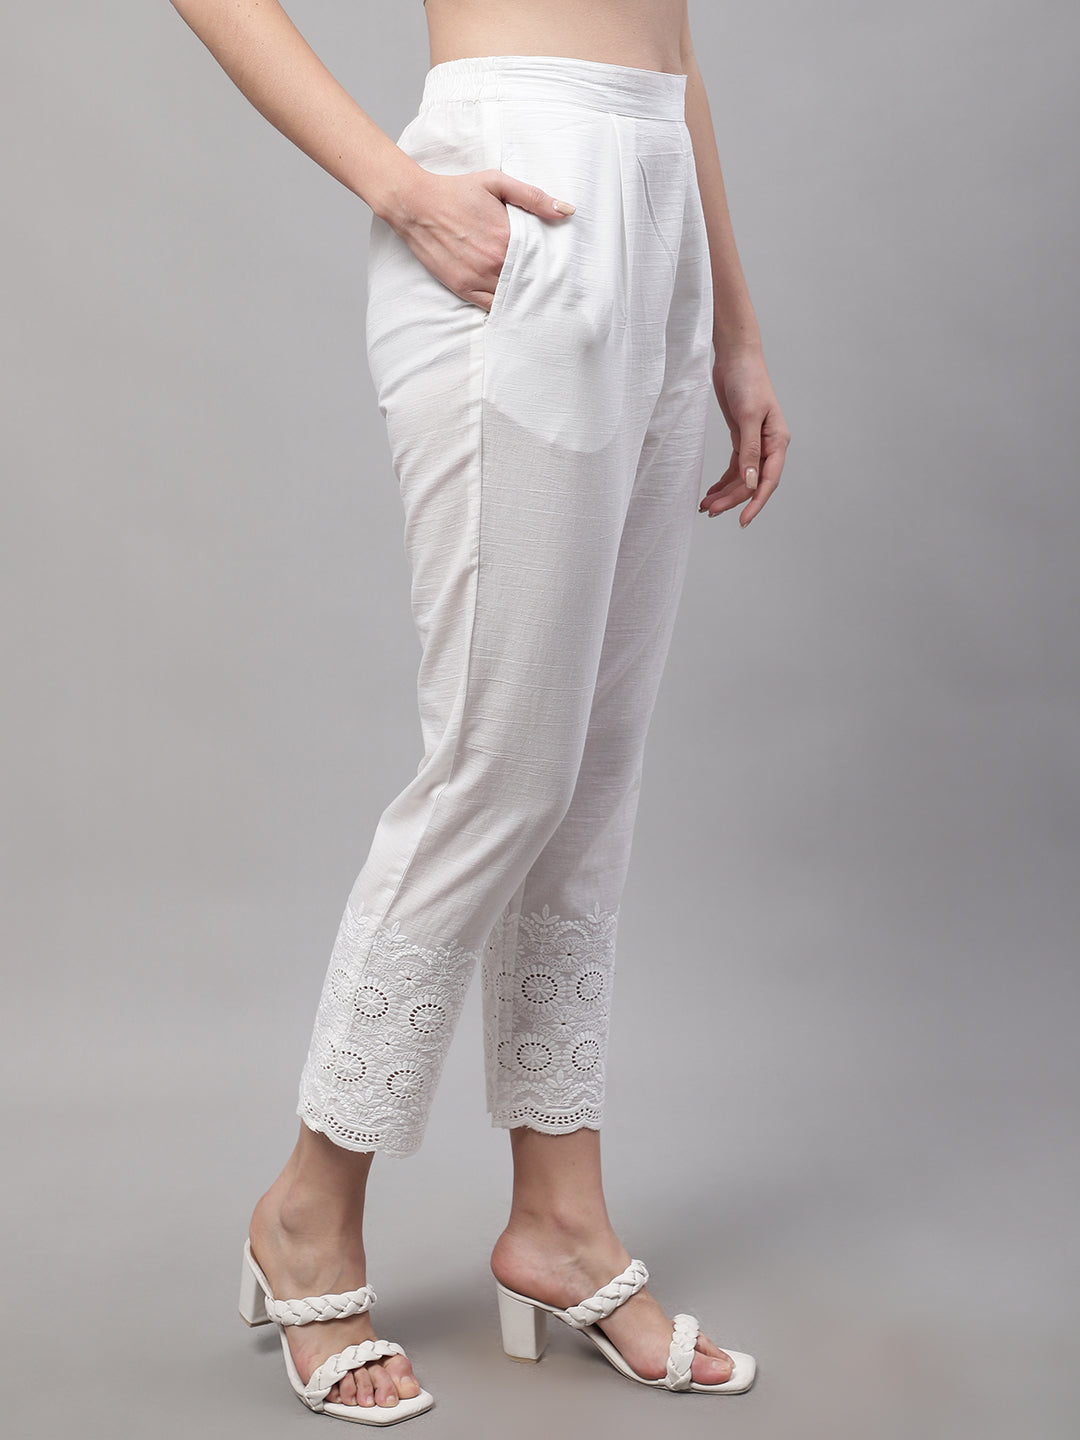 Buy Size Small Ready to Ship Formal Silk Women Embroidered Cigarette Pants  White Online in India - Etsy